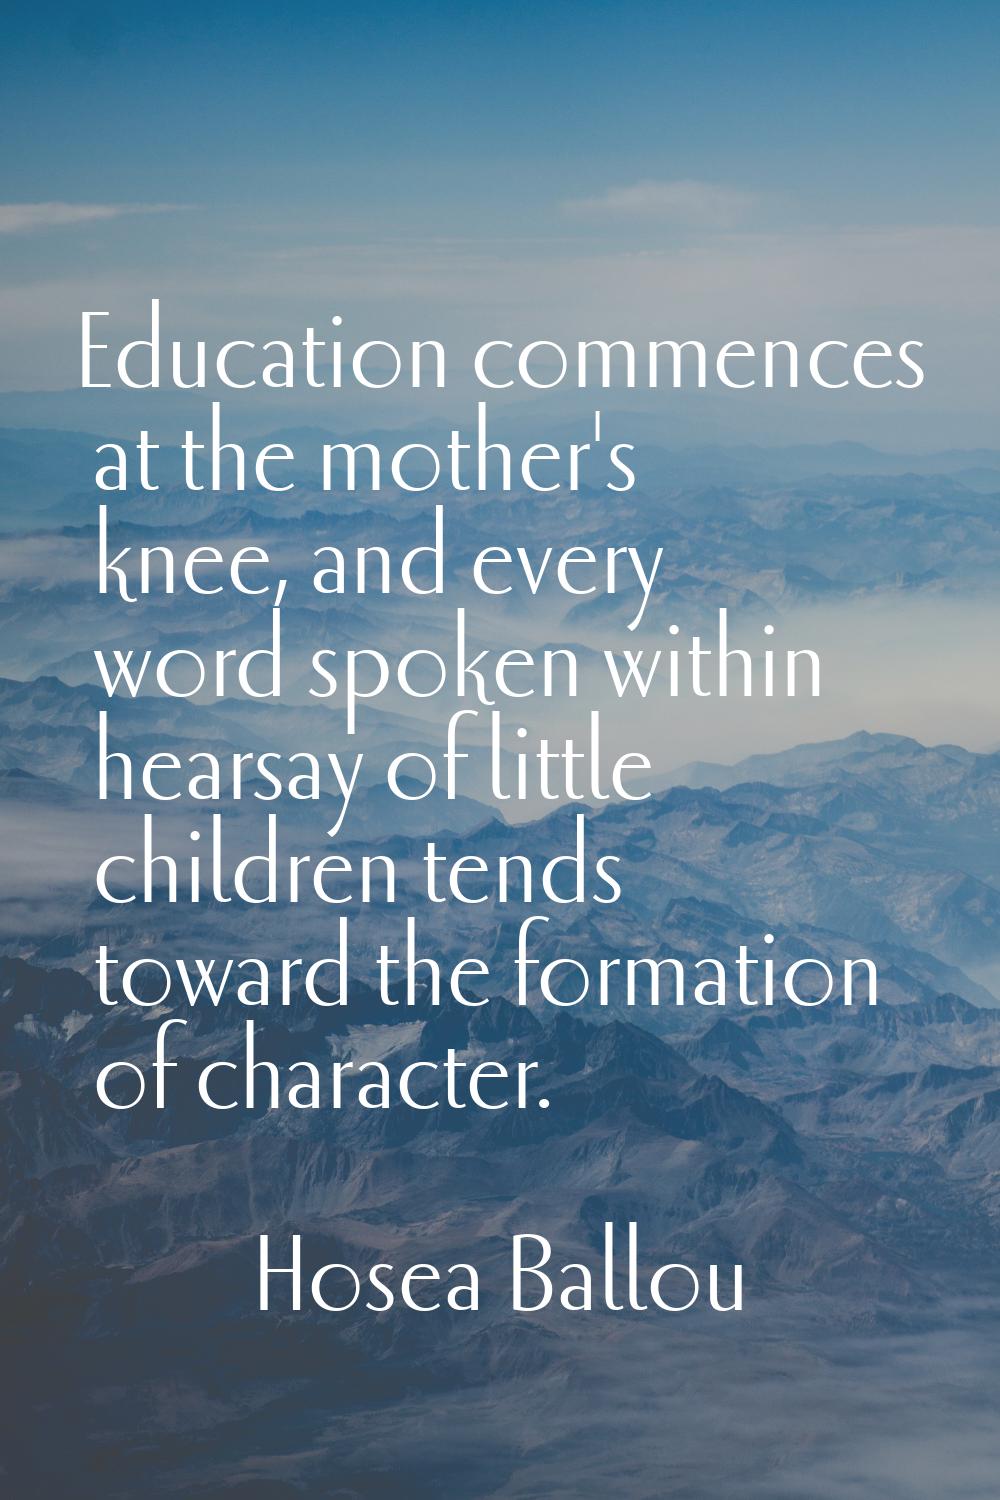 Education commences at the mother's knee, and every word spoken within hearsay of little children t